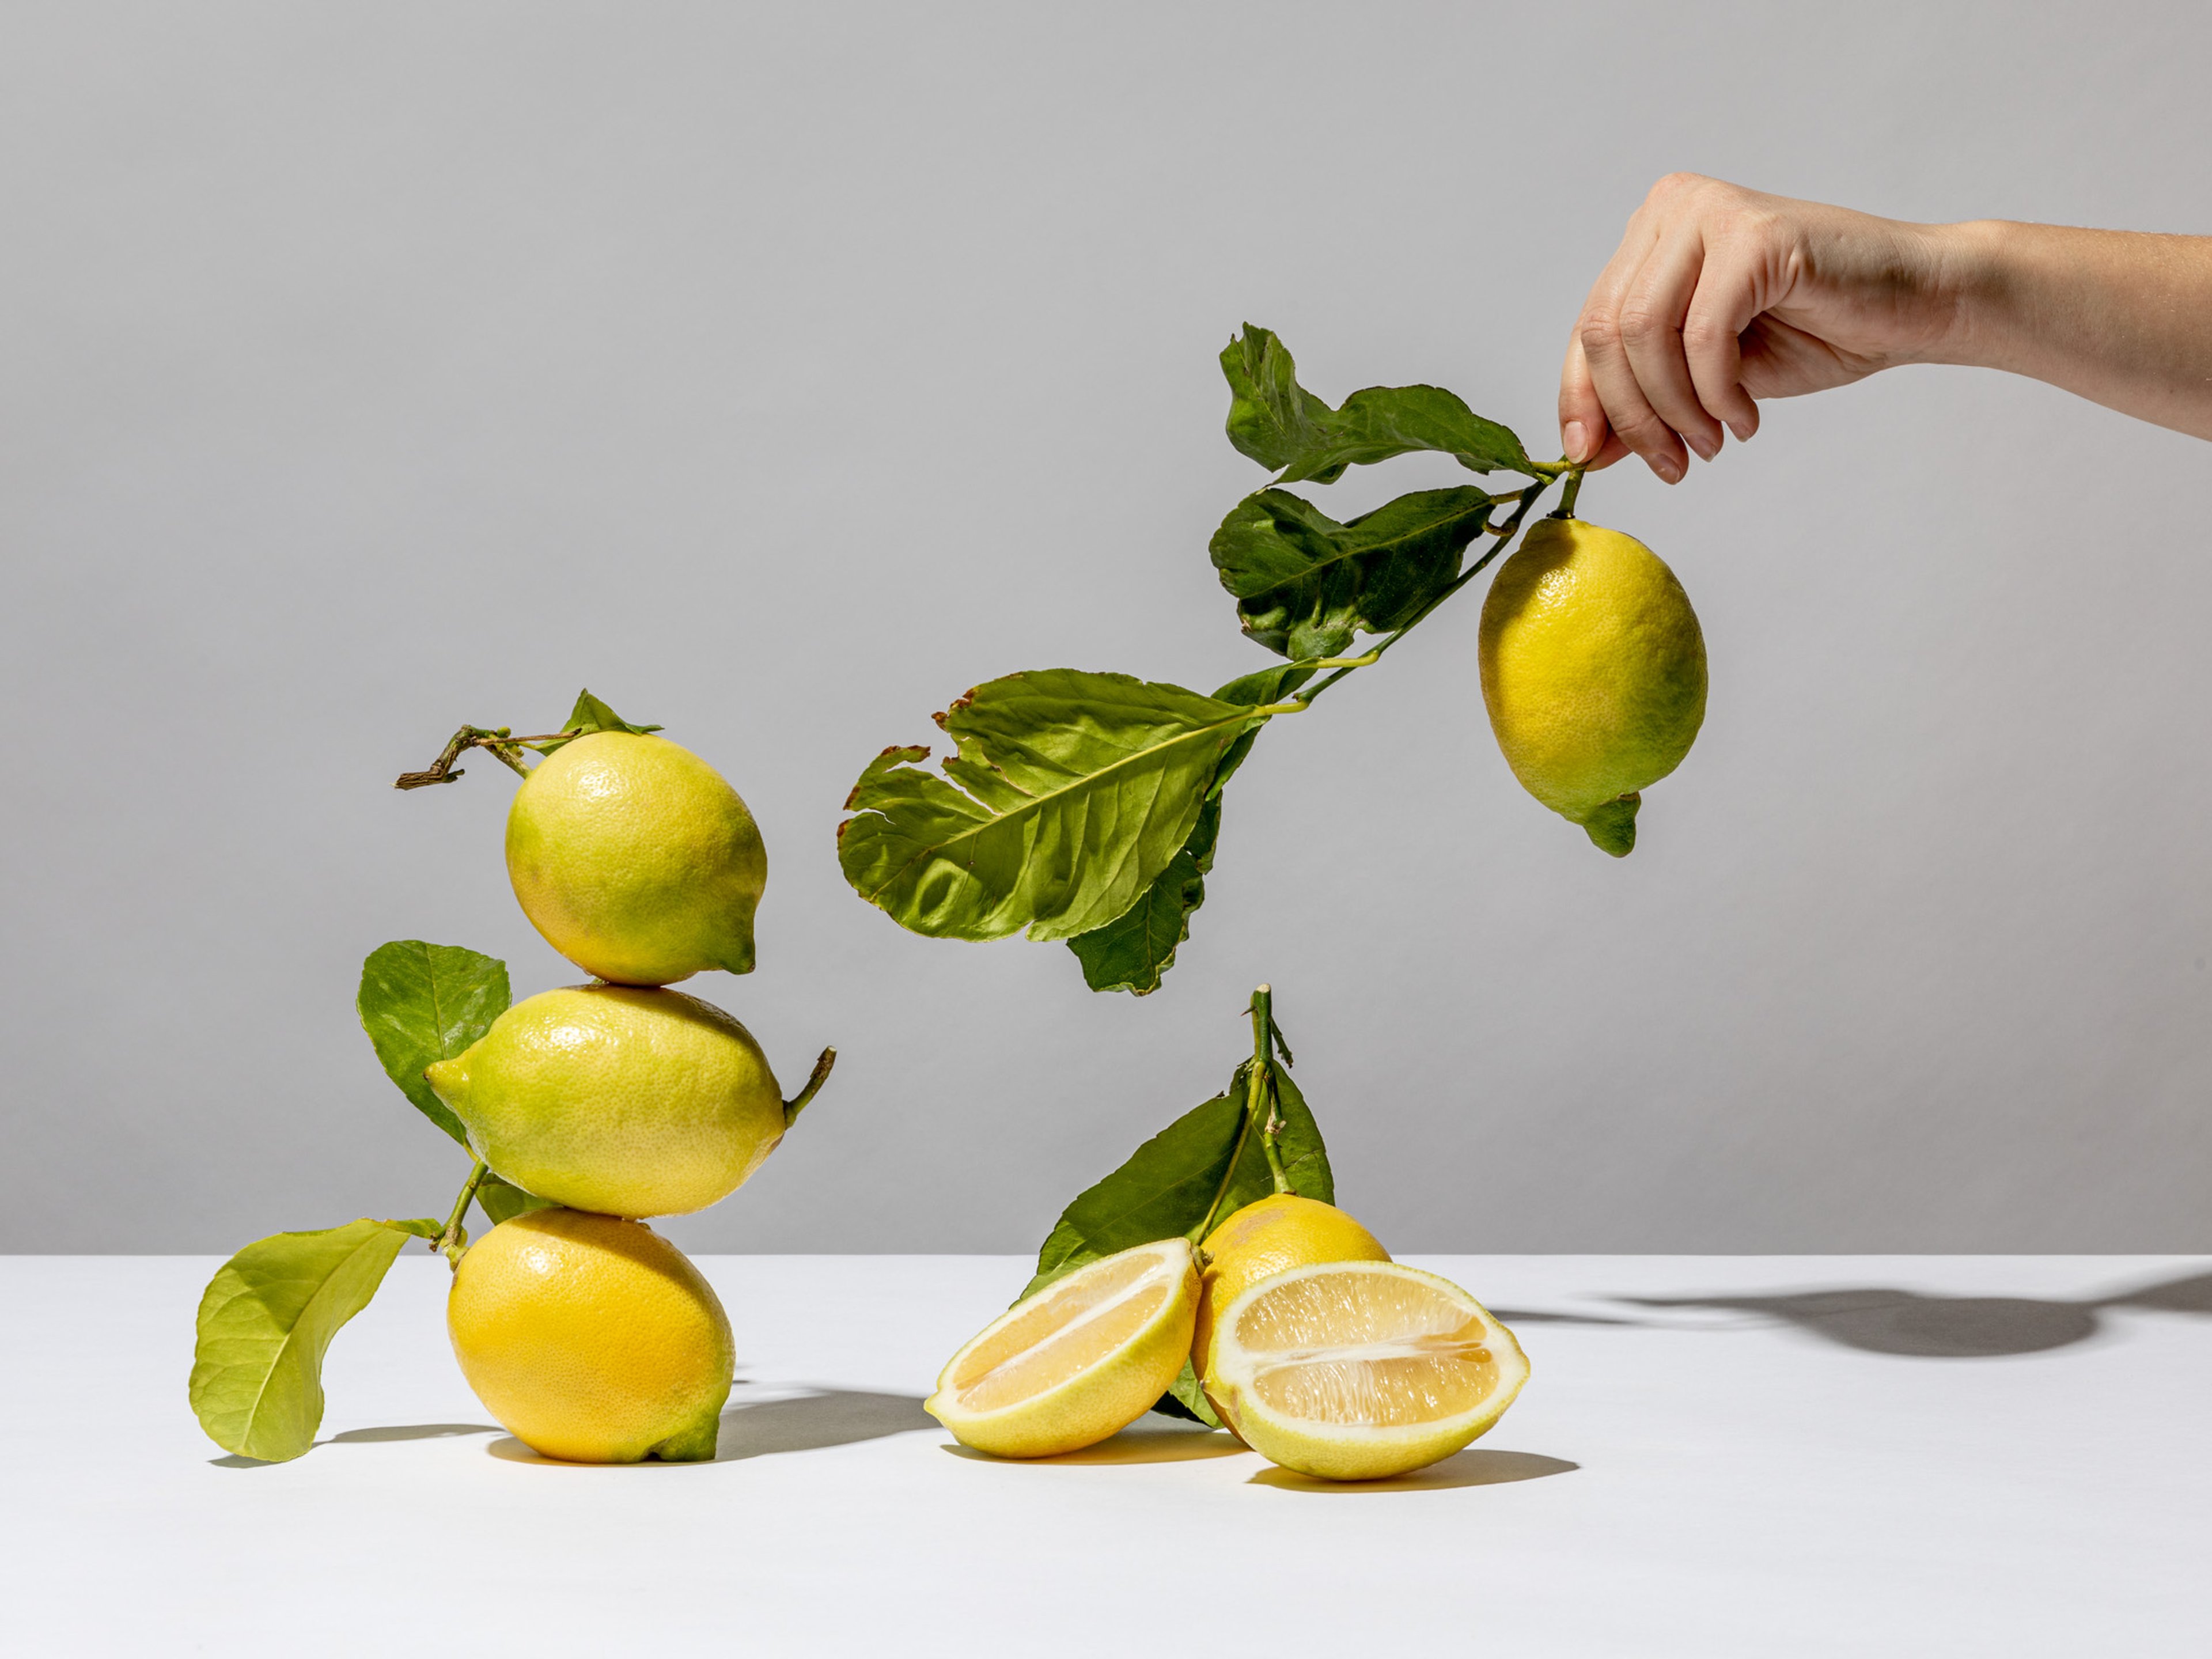 Everything You Need to Know About Preparing and Storing In Season Lemon